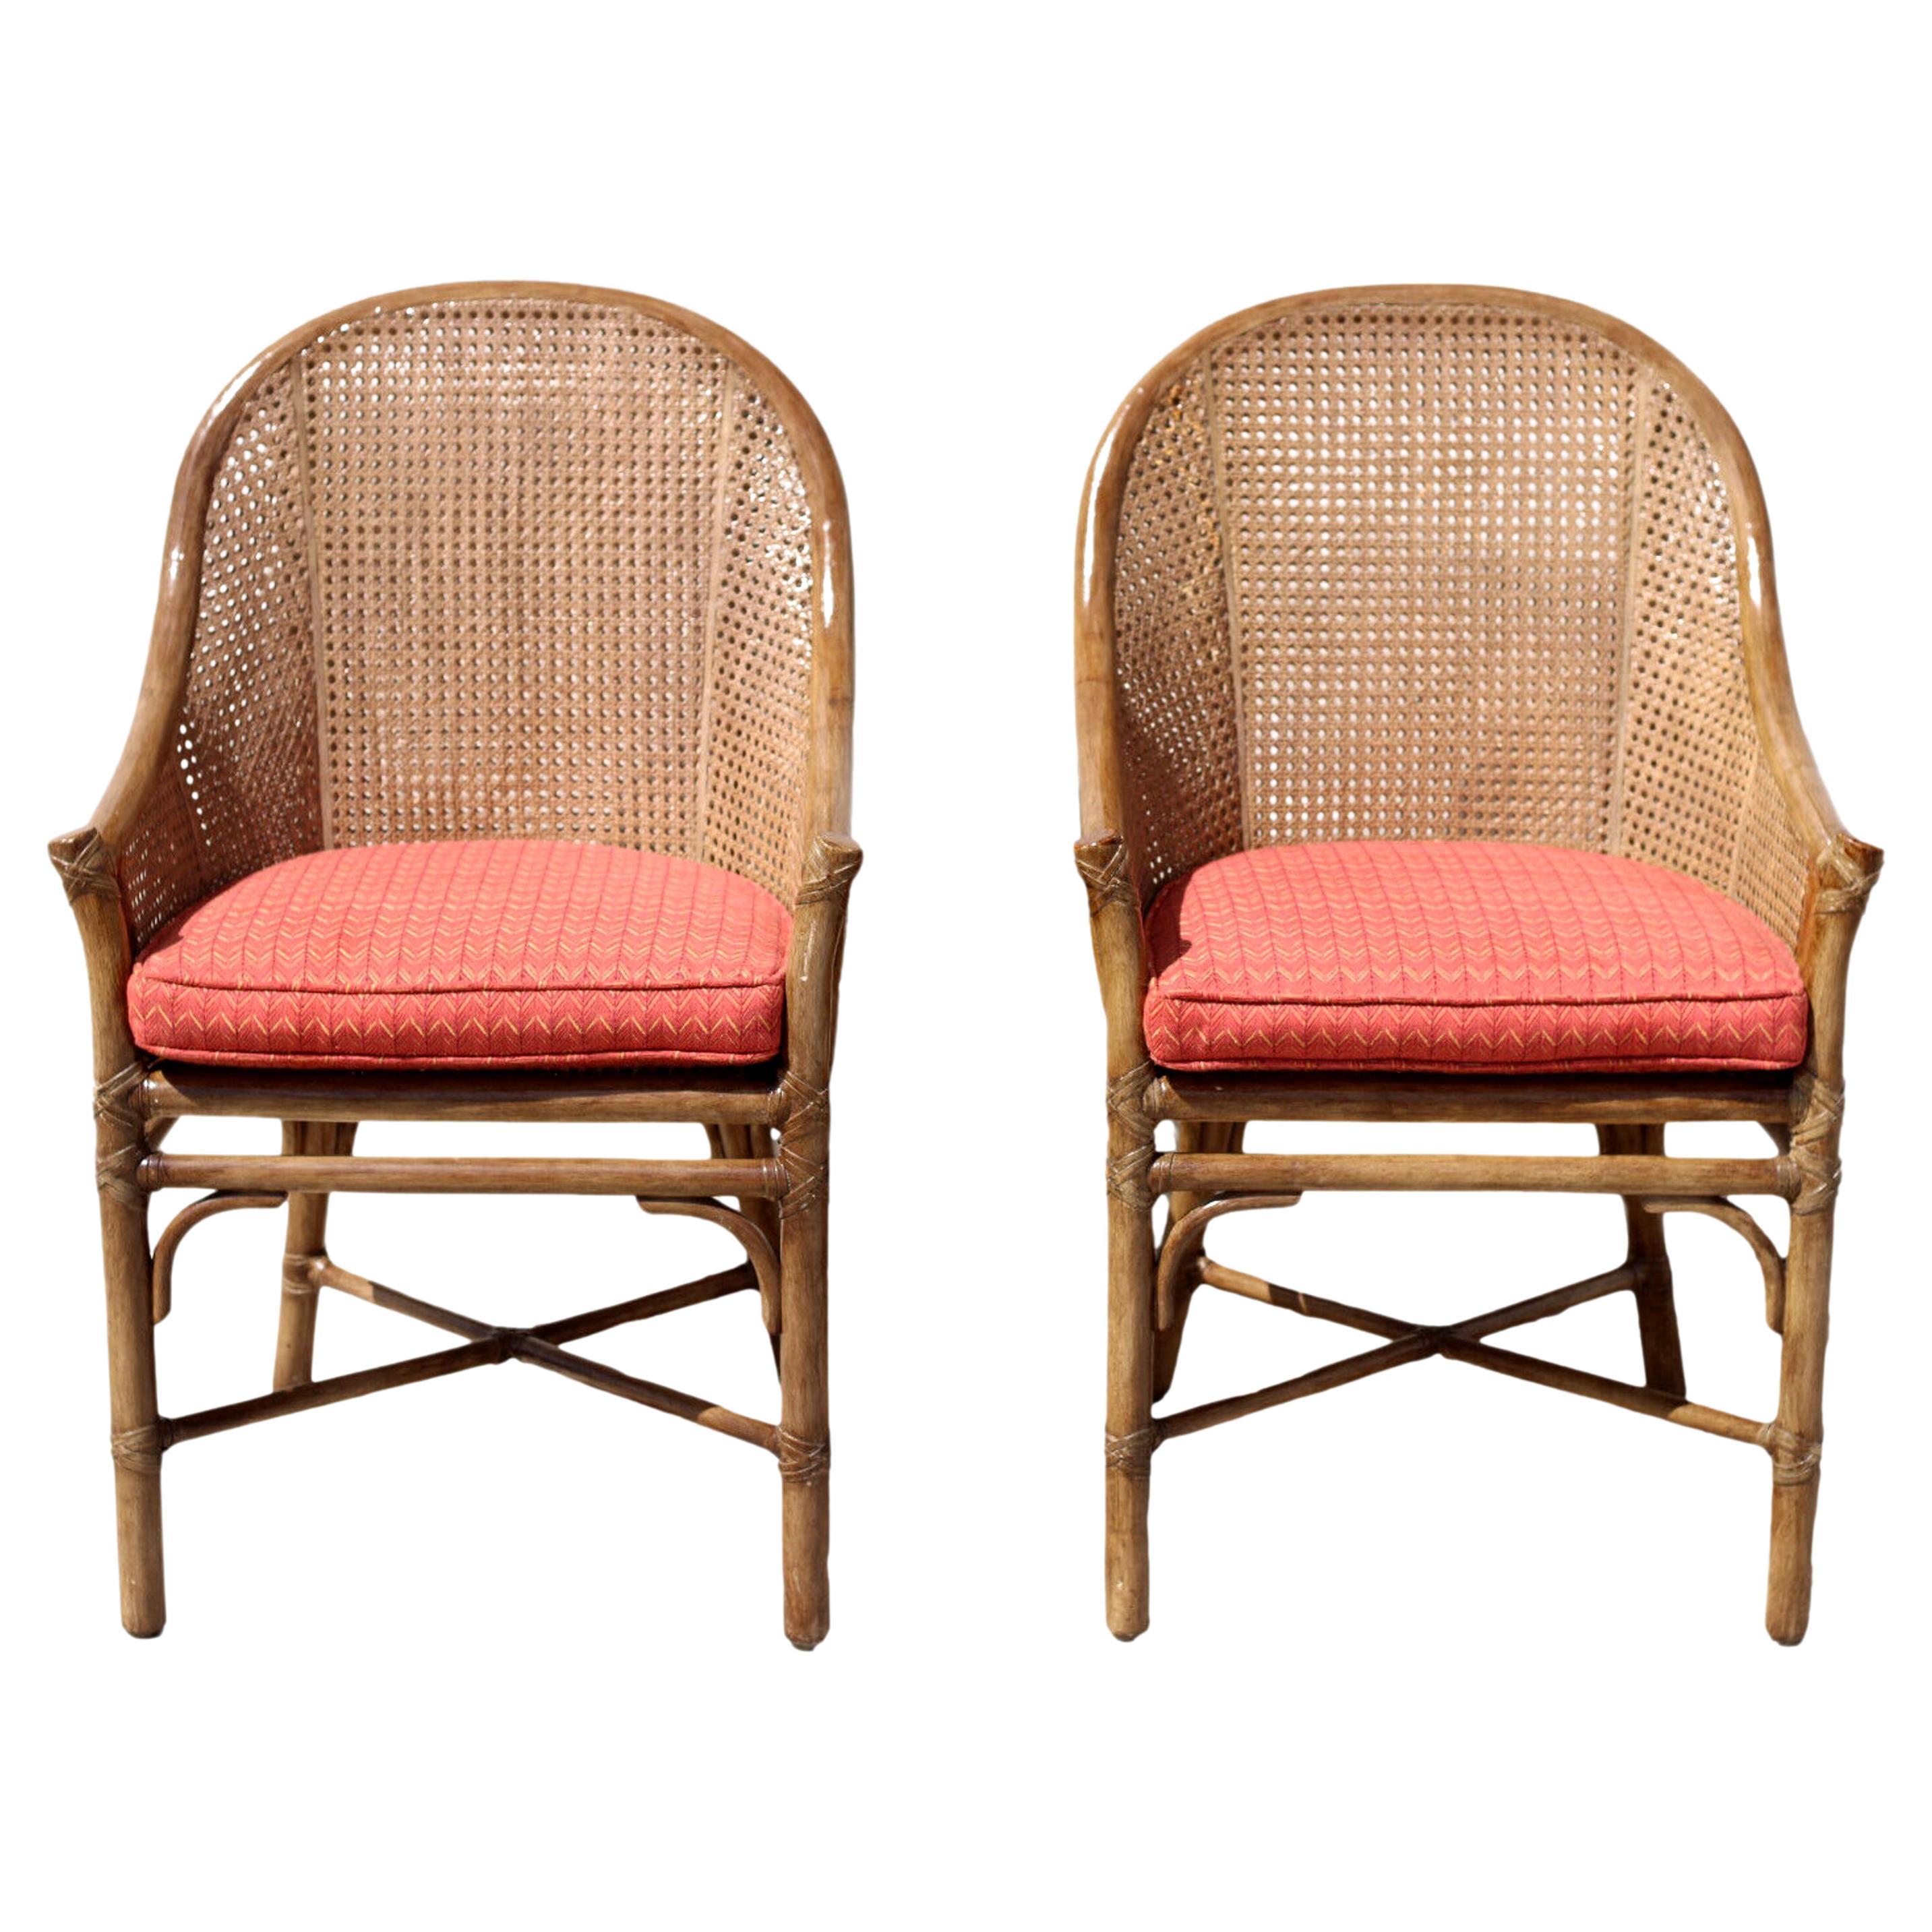 Elinor McGuire Rattan Caned Barrel Back Arm Chairs, a Pair For Sale